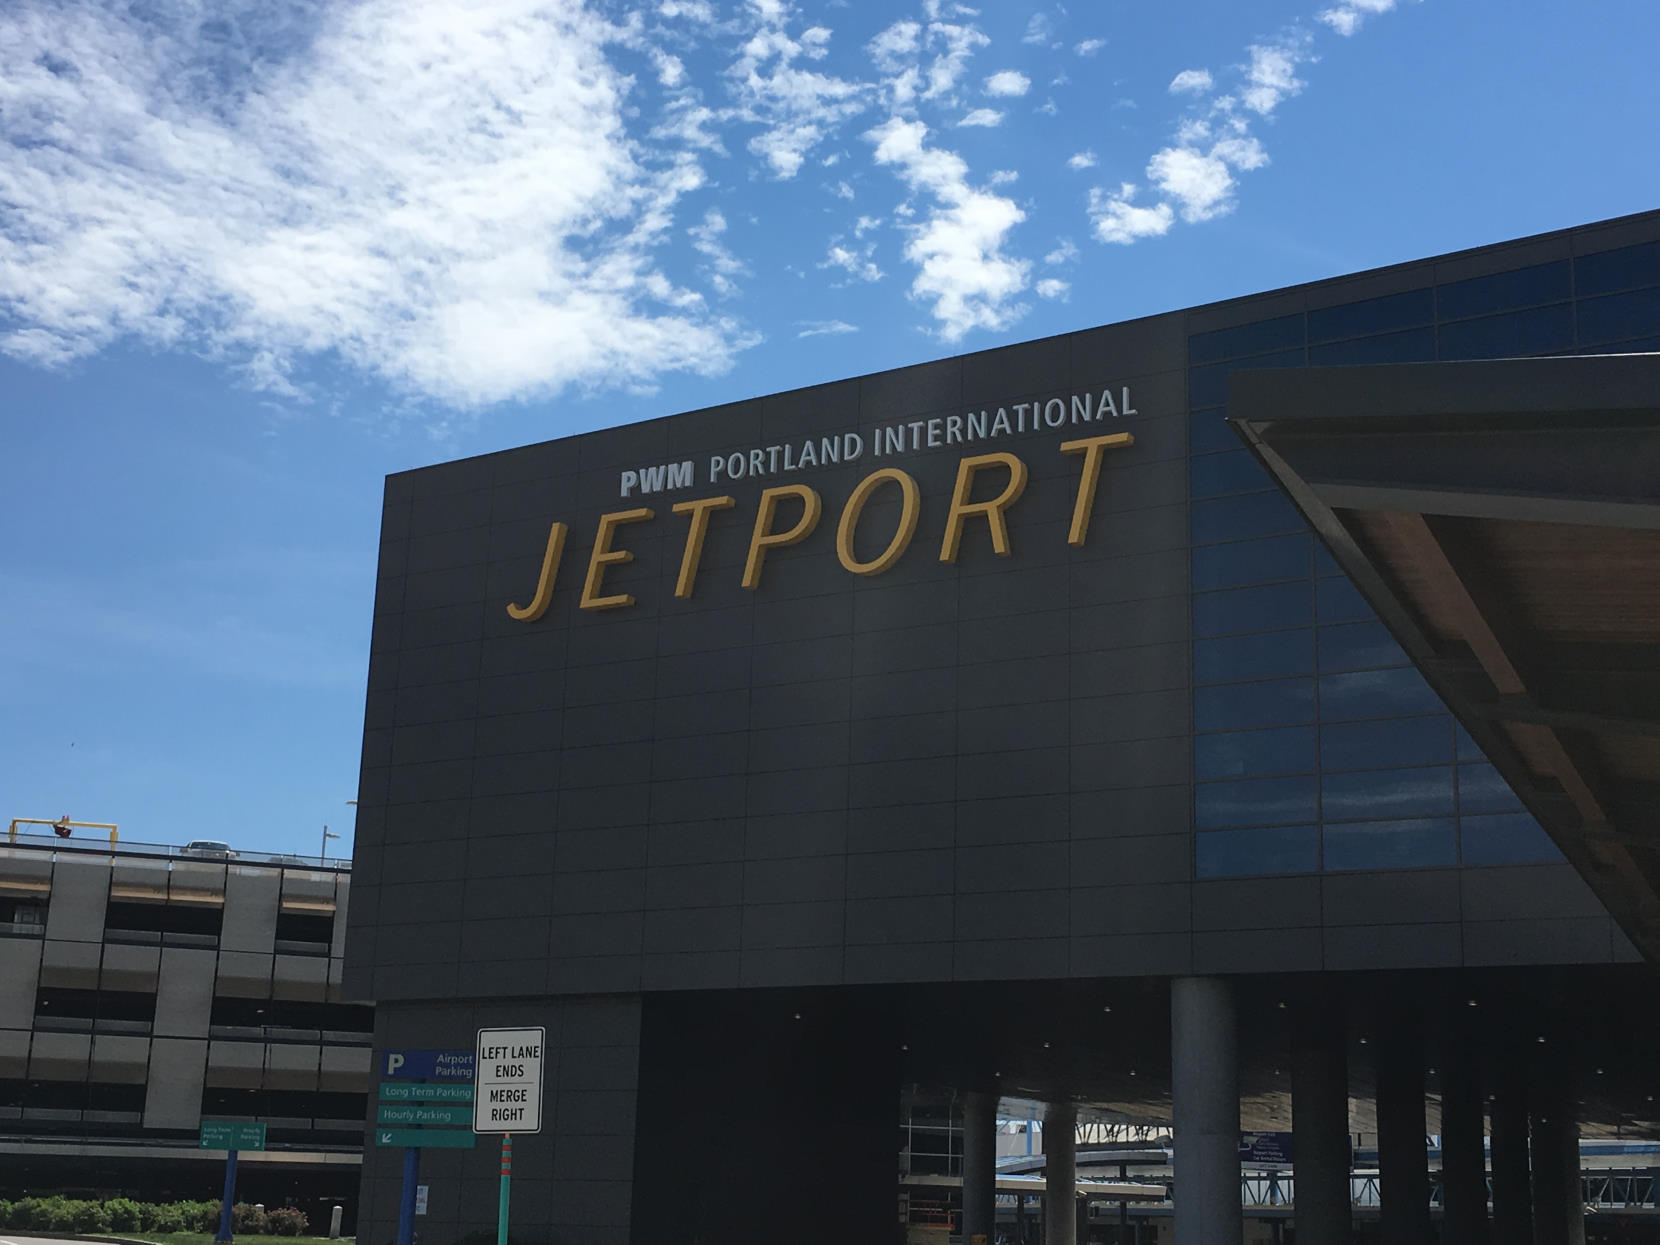 Terminal overhanging the arrivals/departure loop at PWM, with a large sign on the building reading 'PWM Portland International Jetport'.